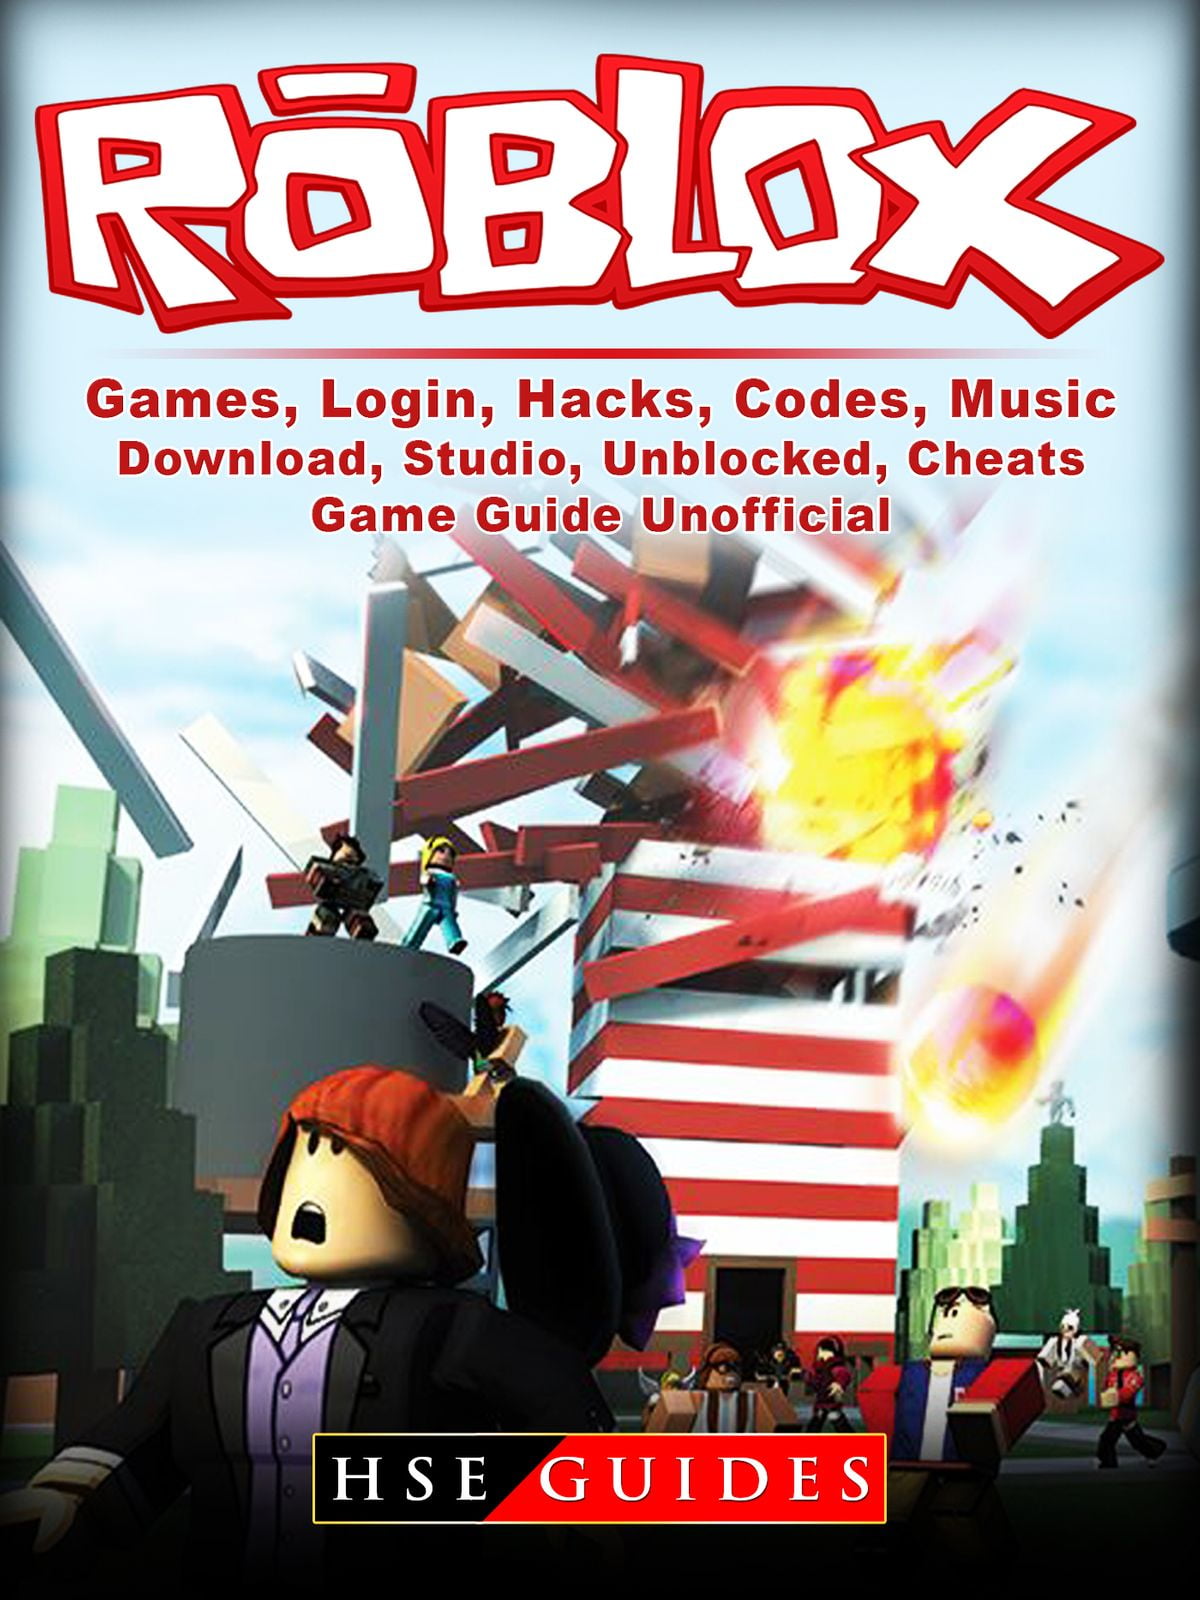 Download Hack For Roblox Pc